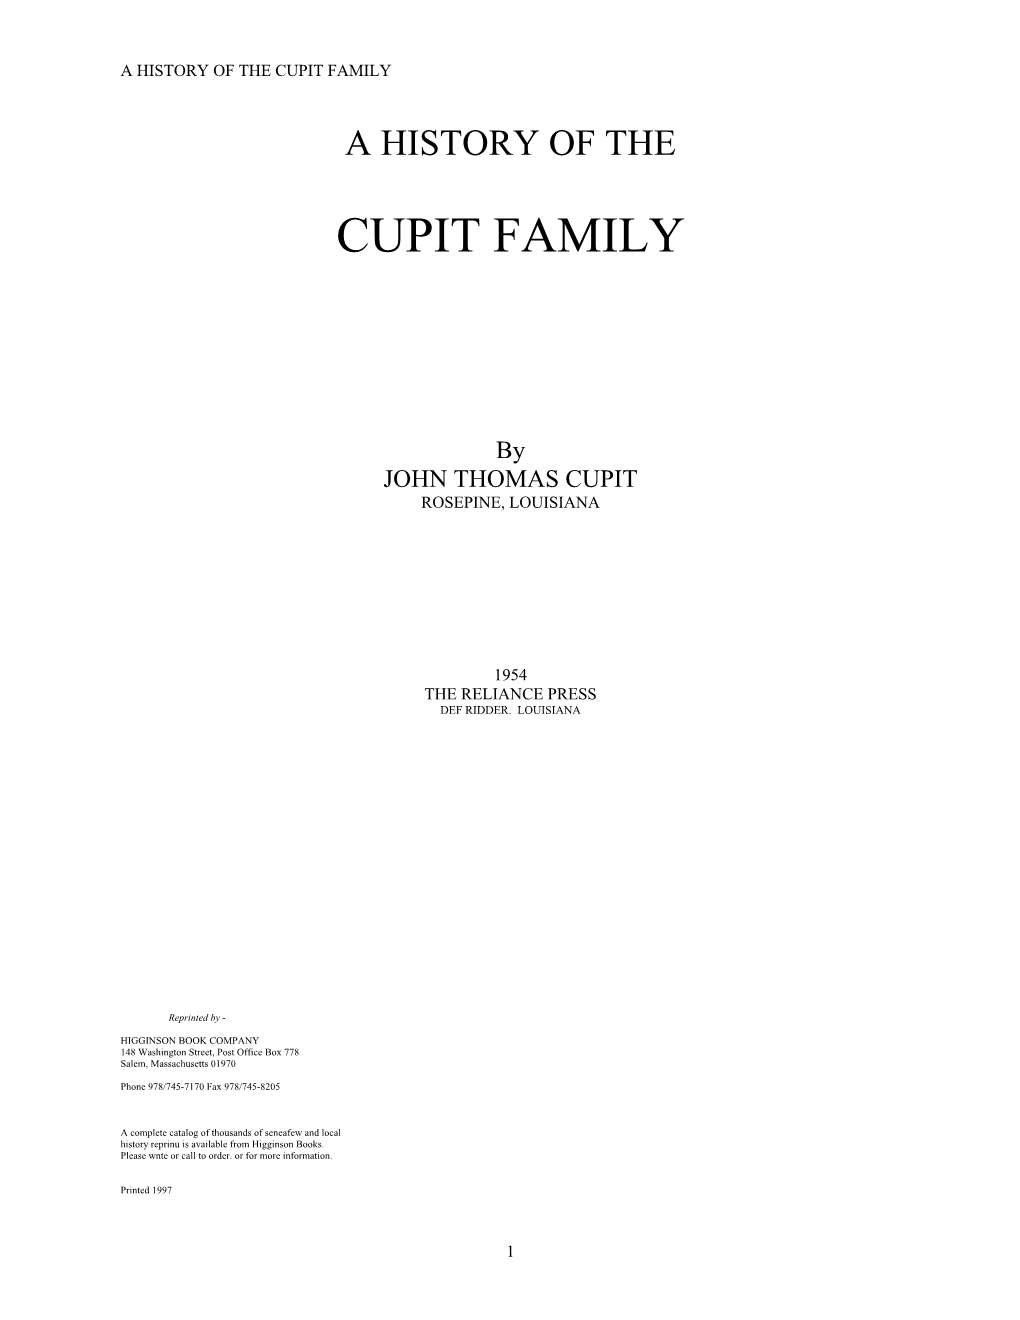 A History of the Cupit Family